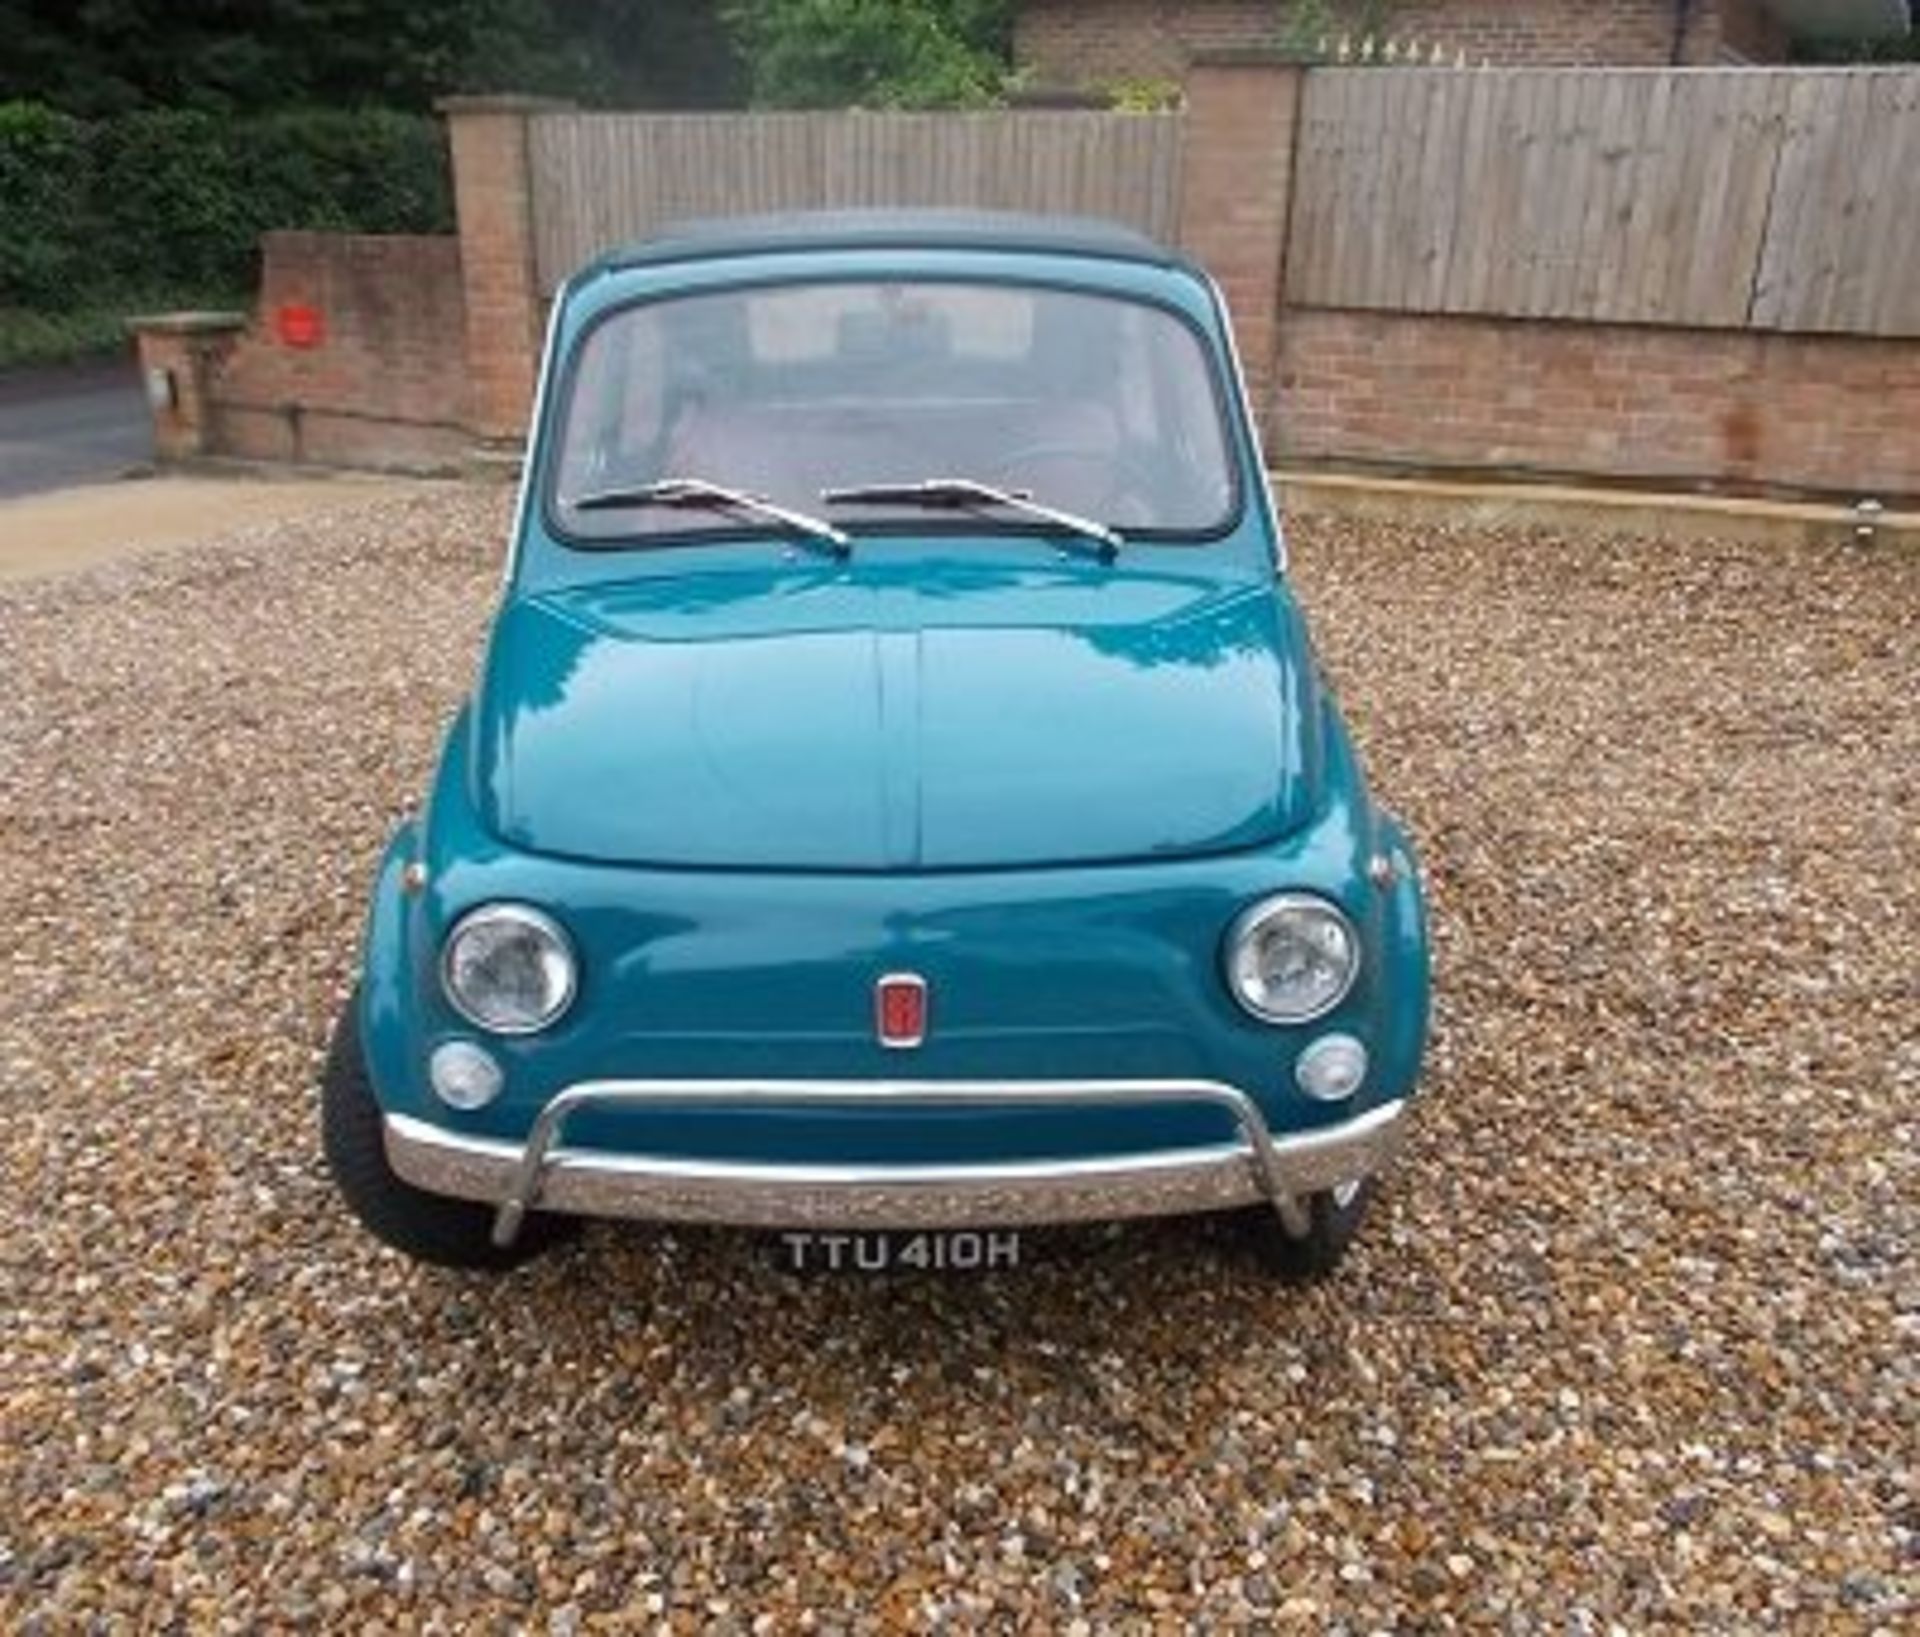 Fiat 500L 1970 “Fully Restored” - The first of our beautiful Fiat 500’s being offered is this 1970 - Image 2 of 7